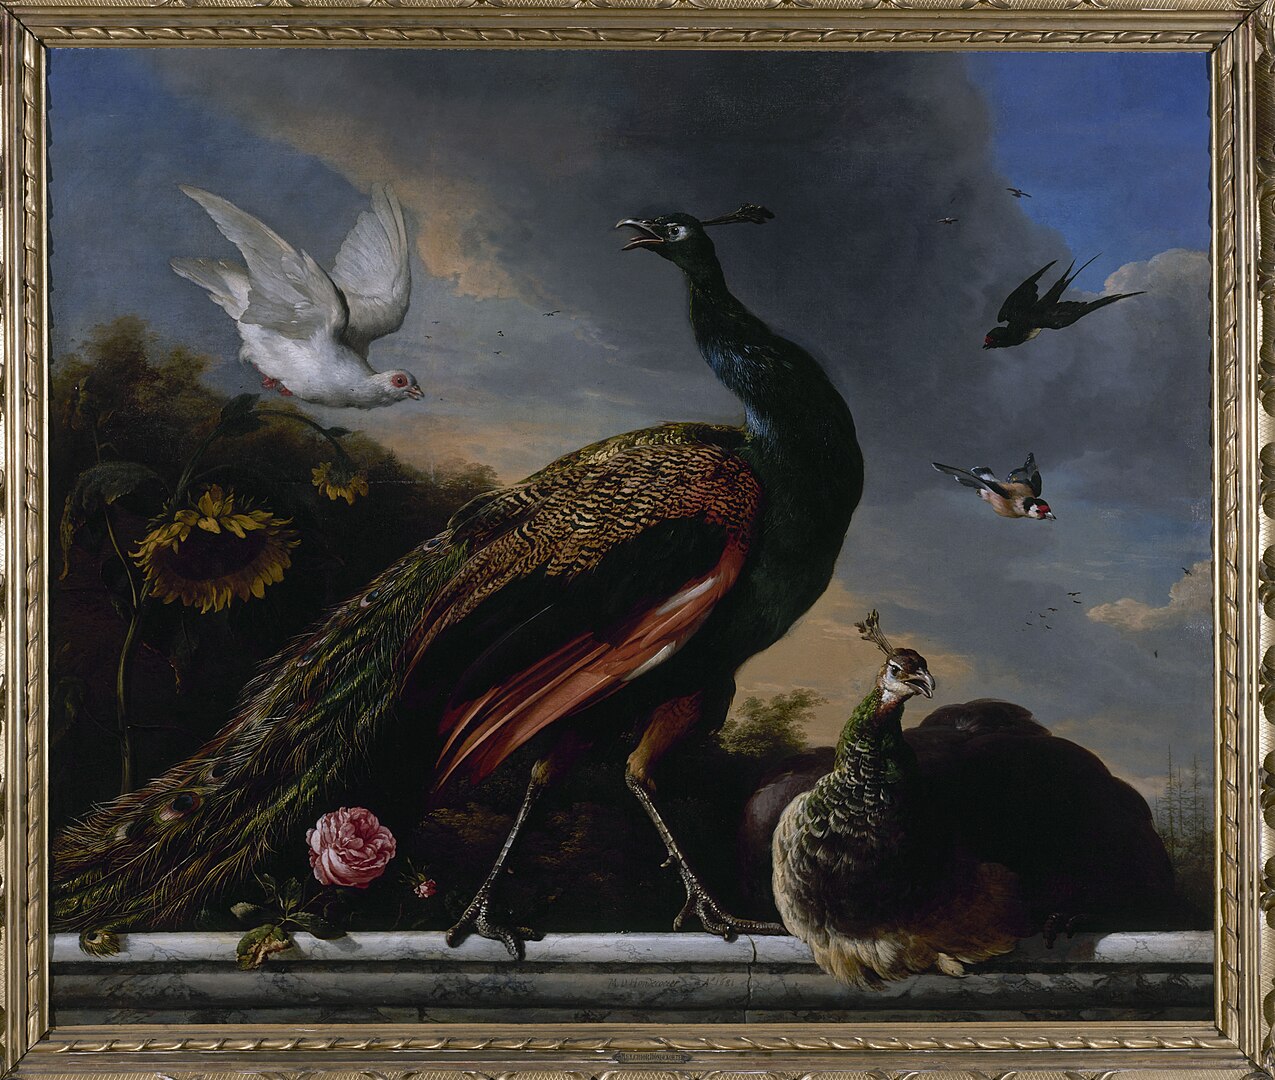 A peacock with other birds